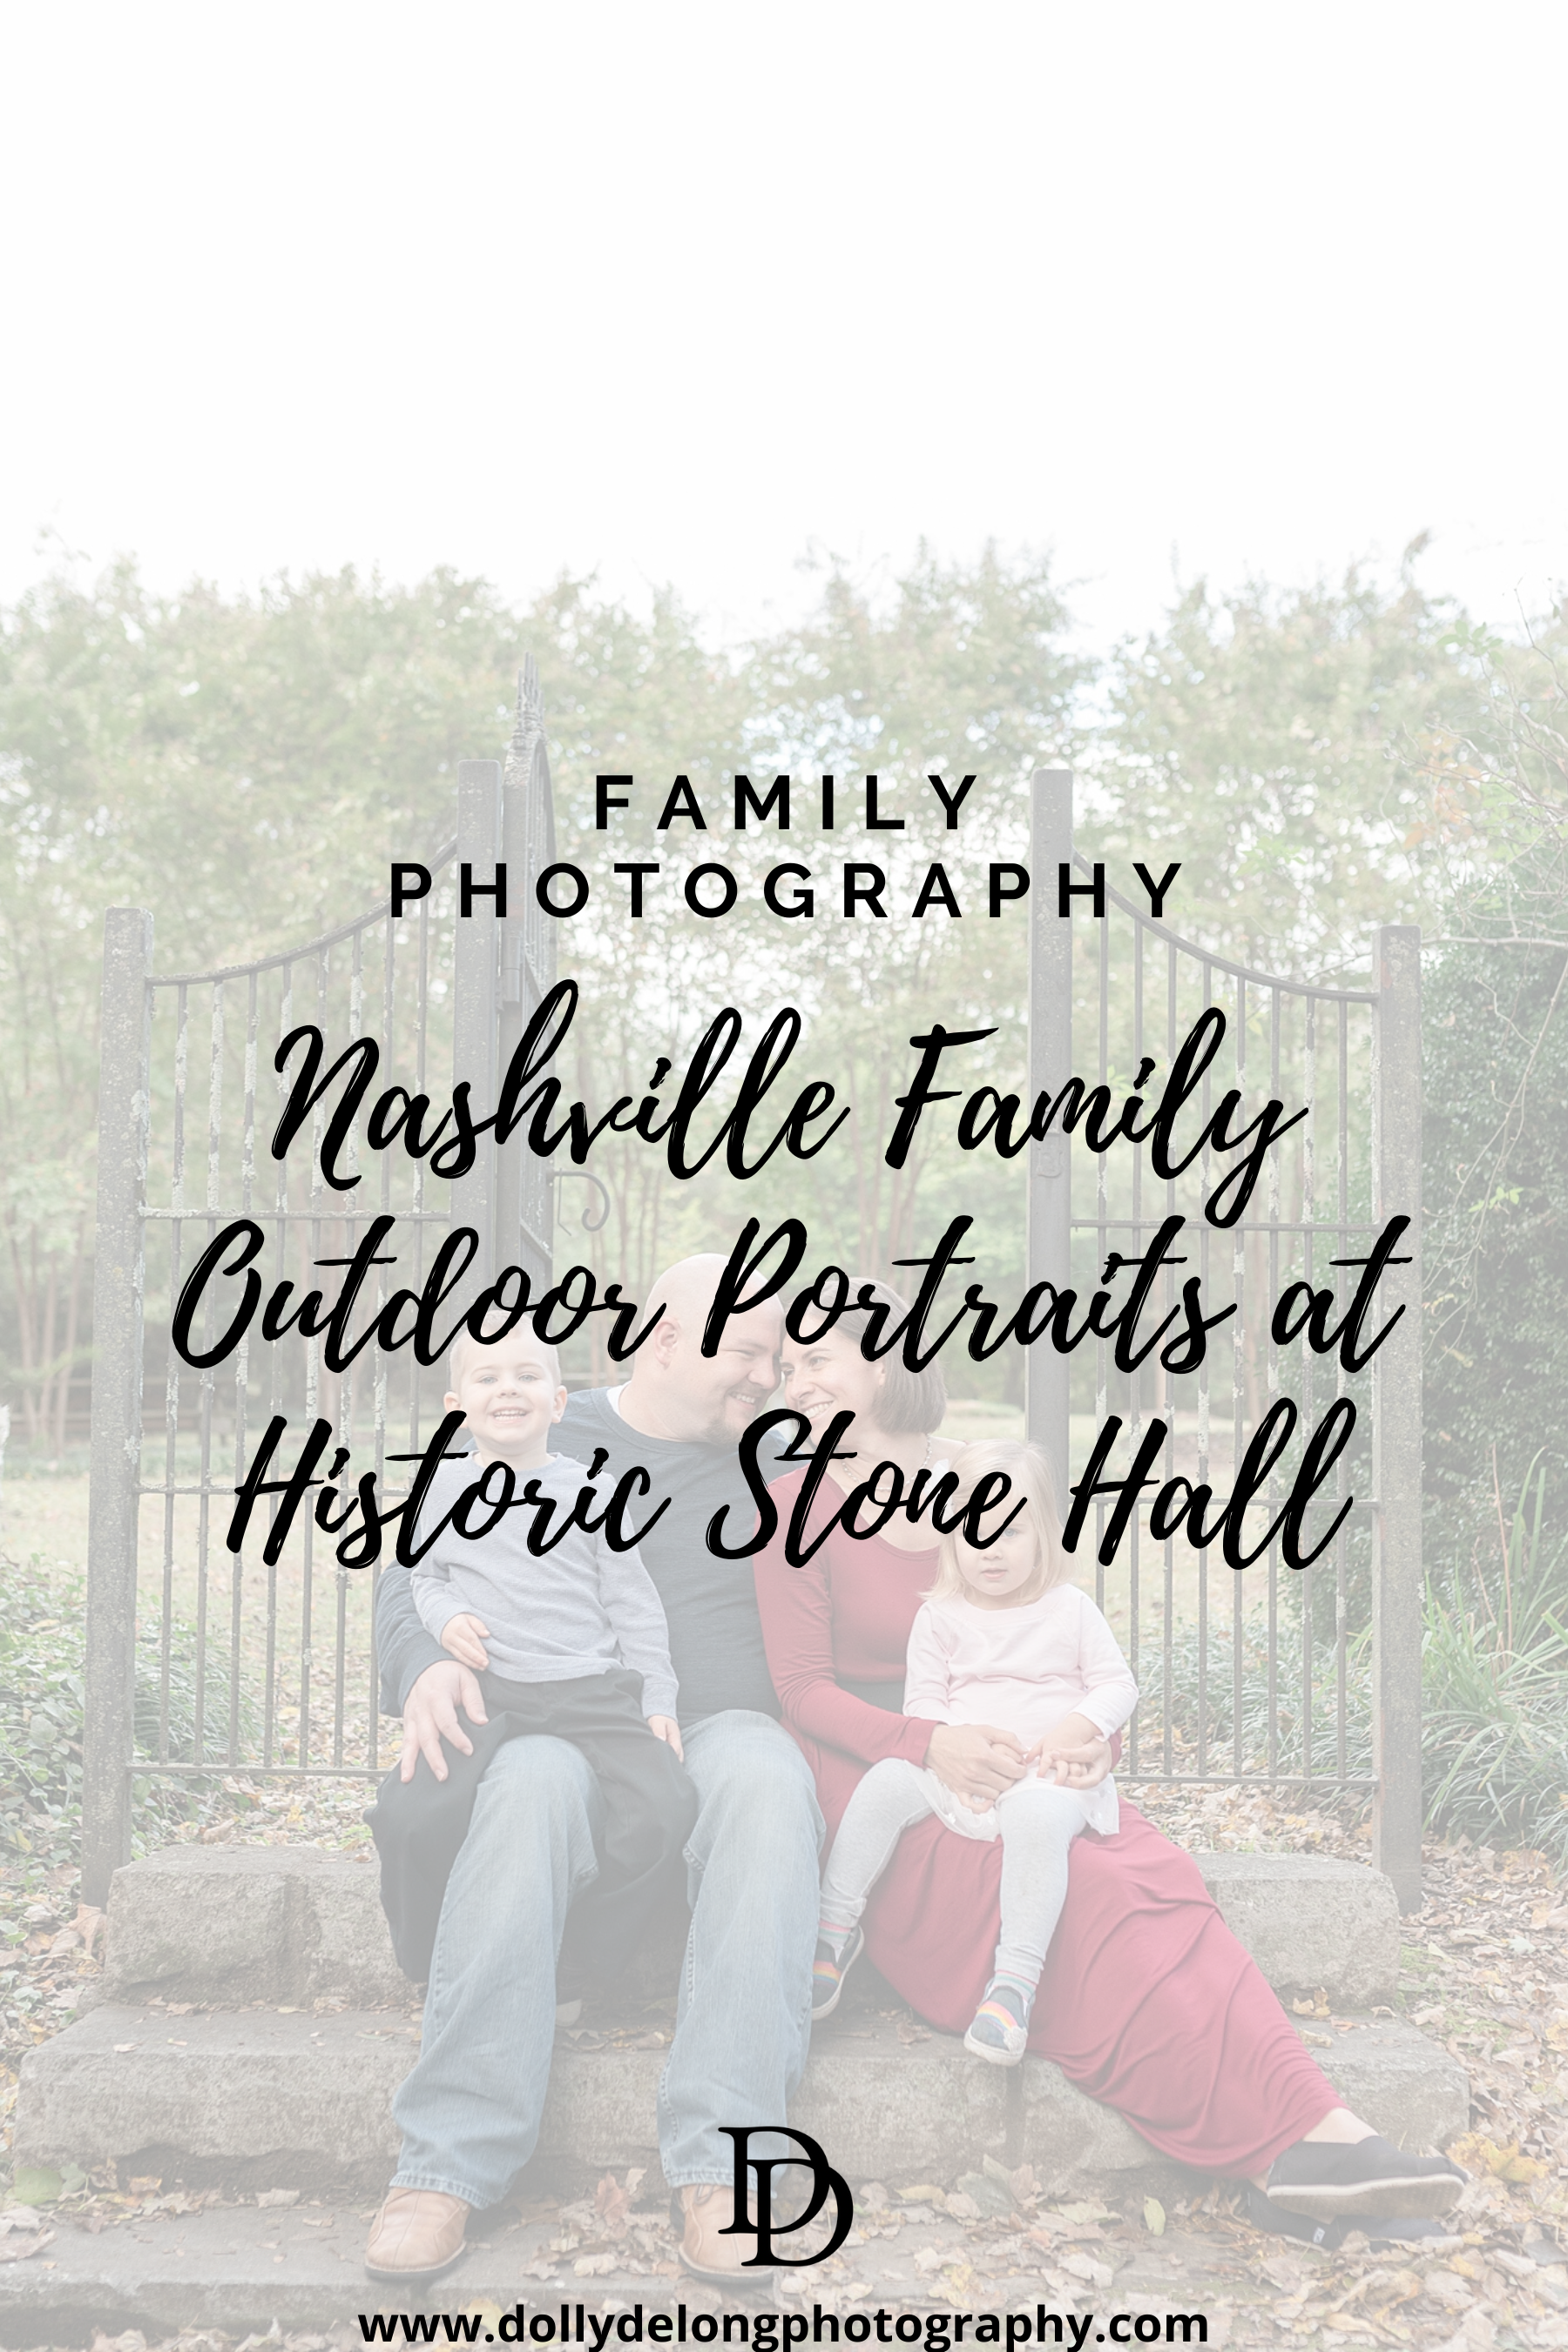 Family of four portraits at historic stone hall in Nashville by Nashville family photographer dolly delong photography